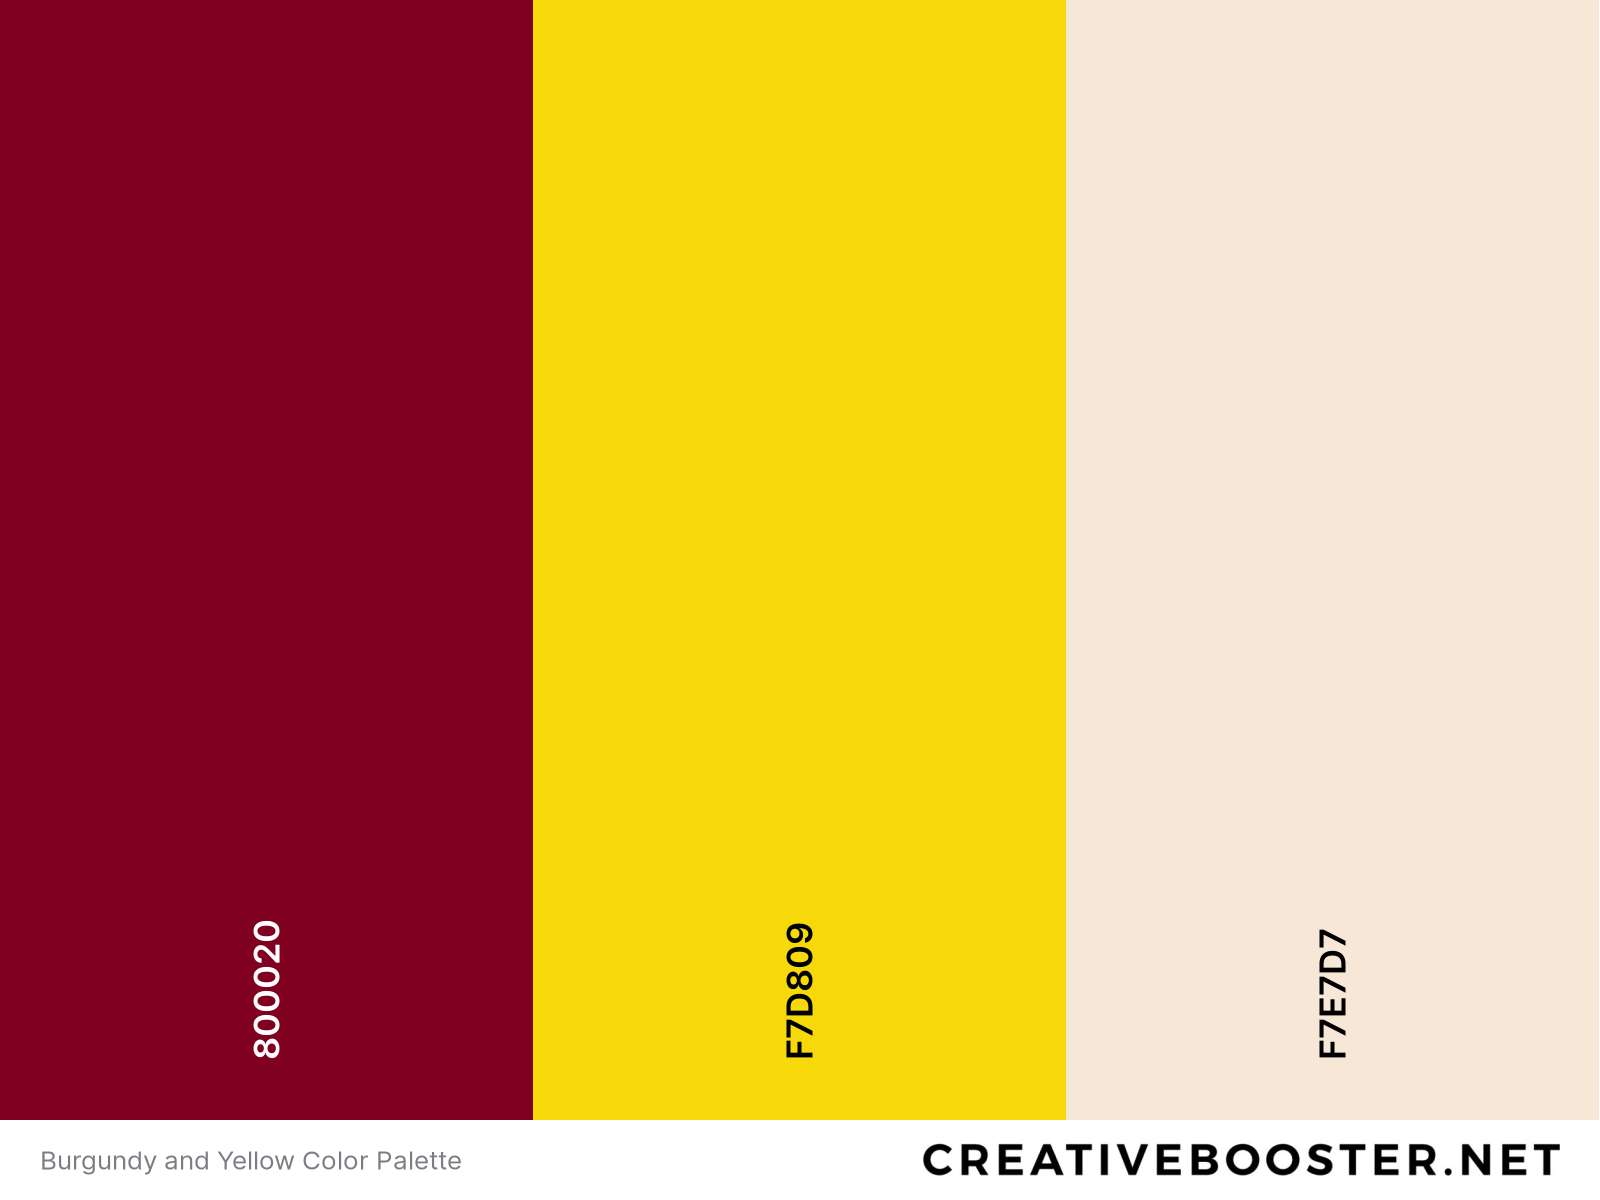 Burgundy and Yellow Color Palette